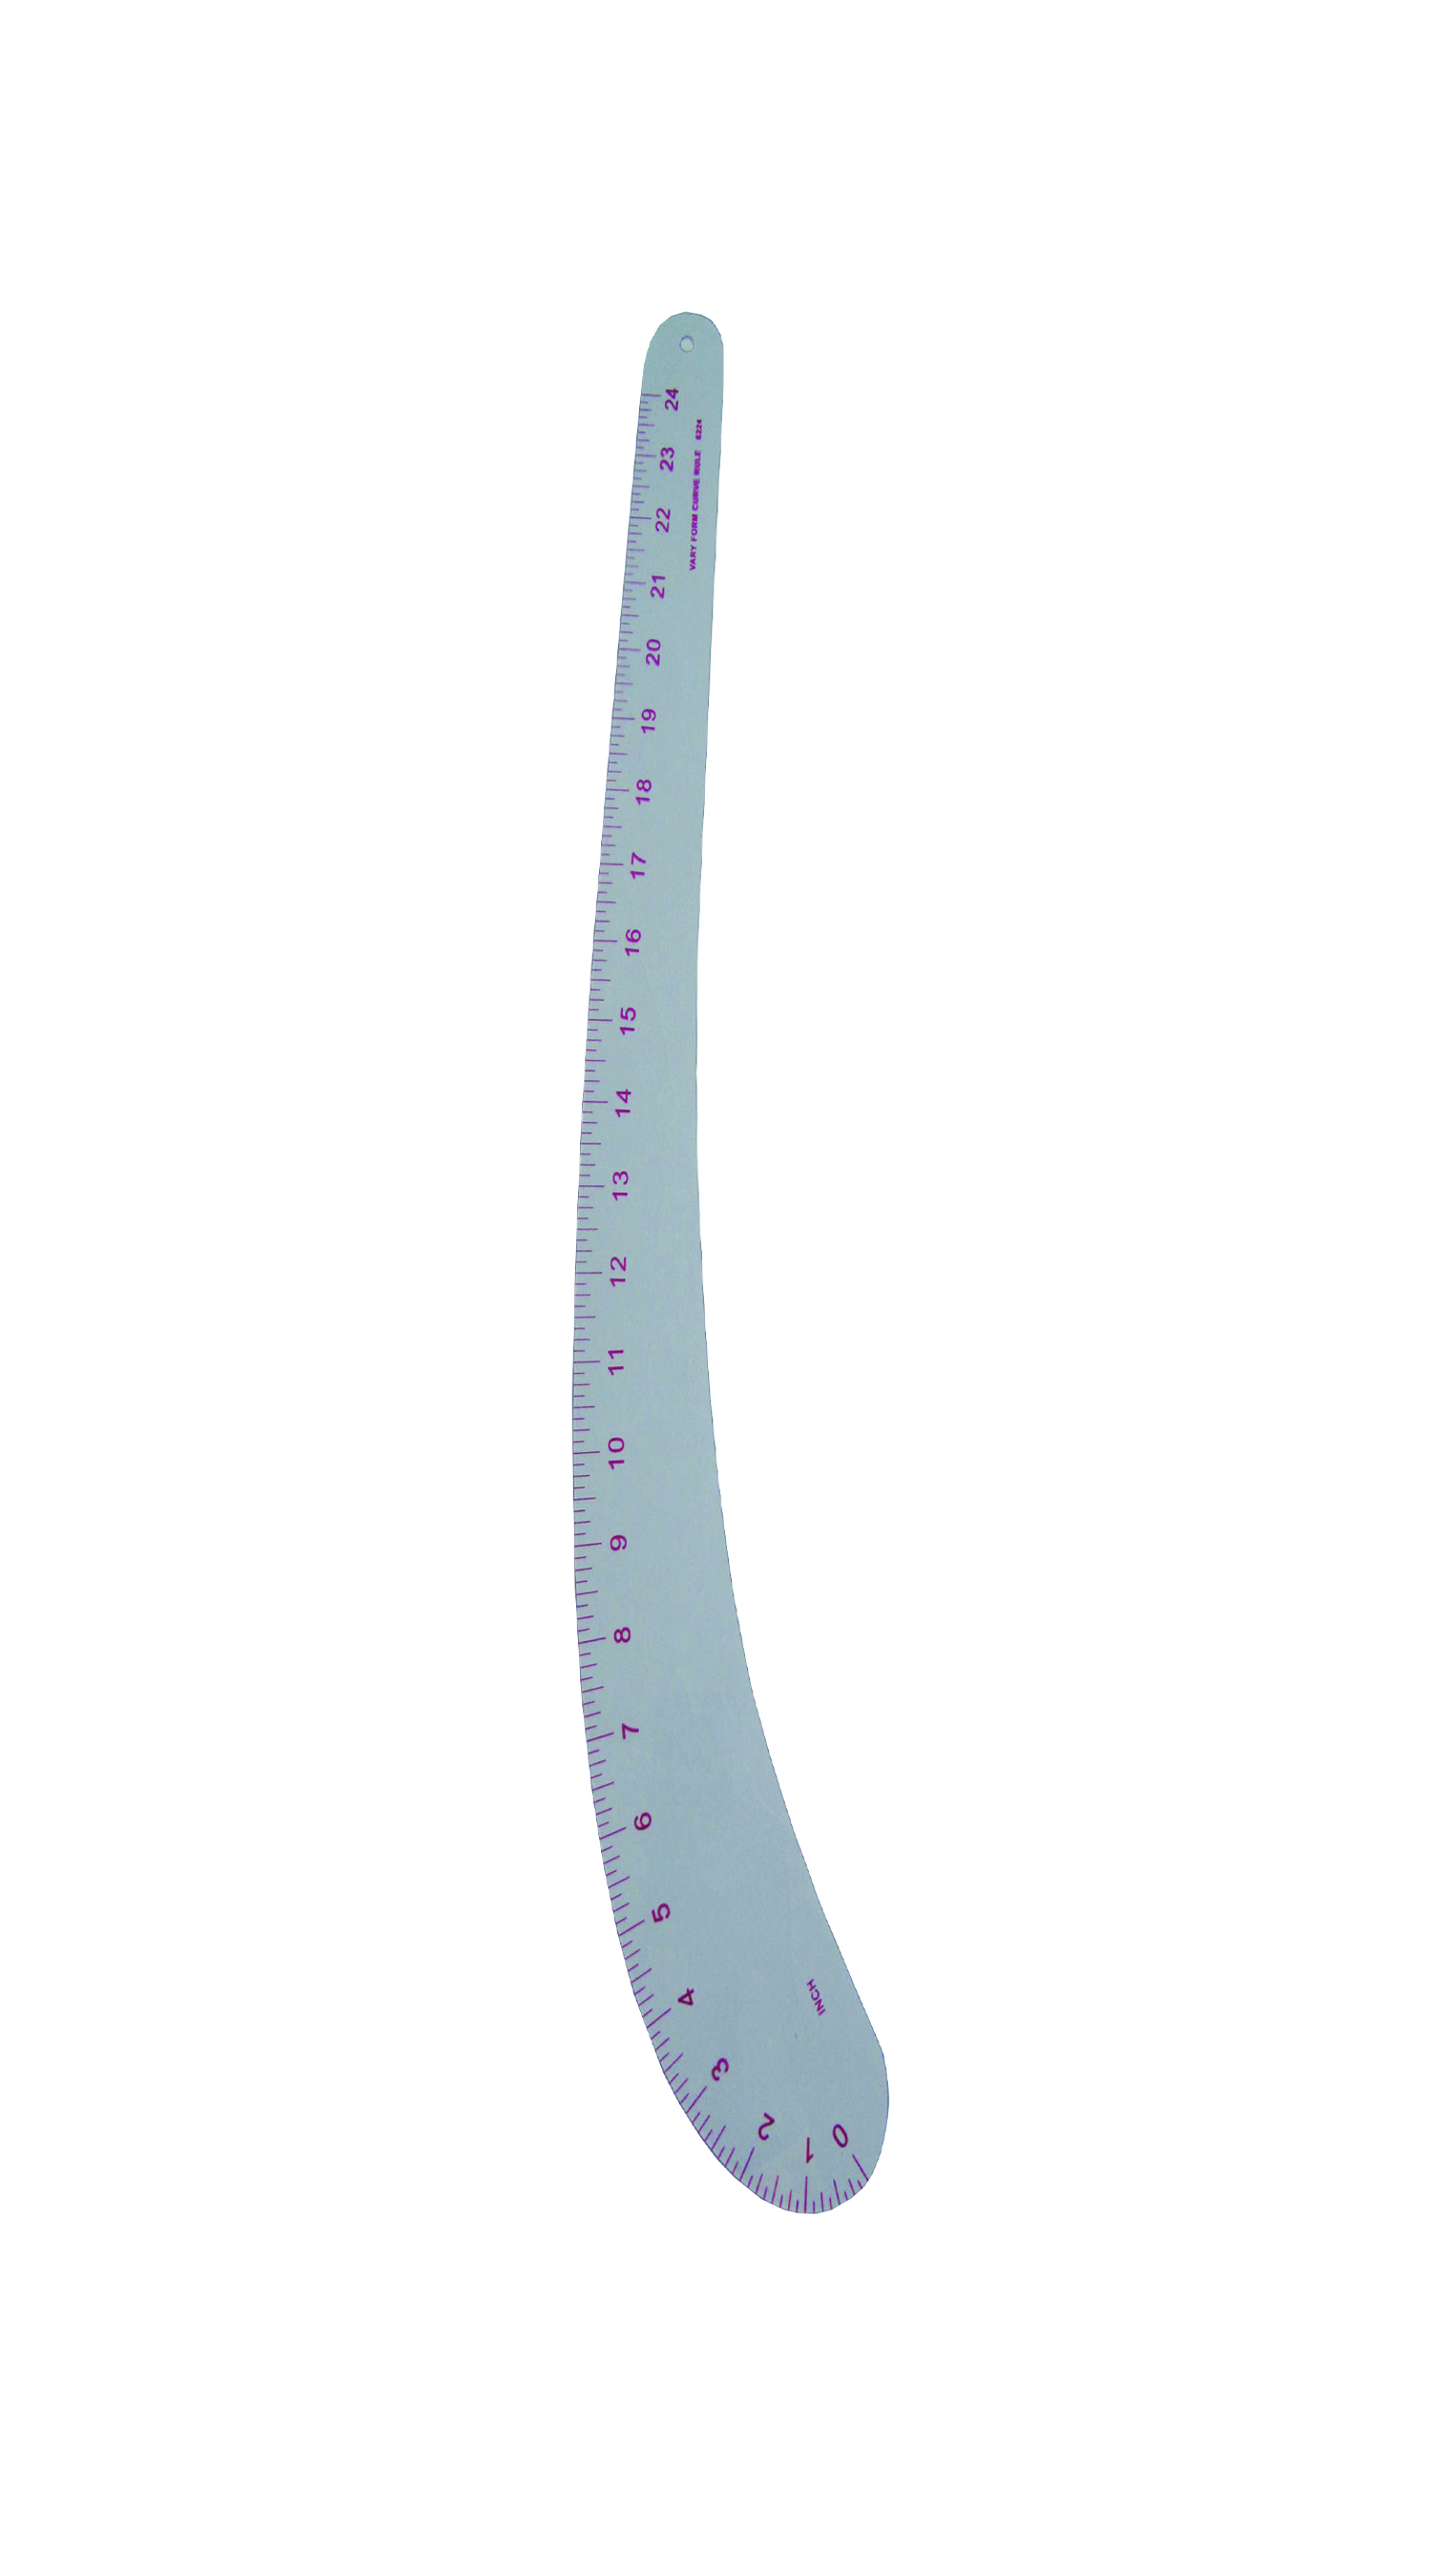 Ruler French Curve Inches 10-006 1 to 12 Inch Art Craft